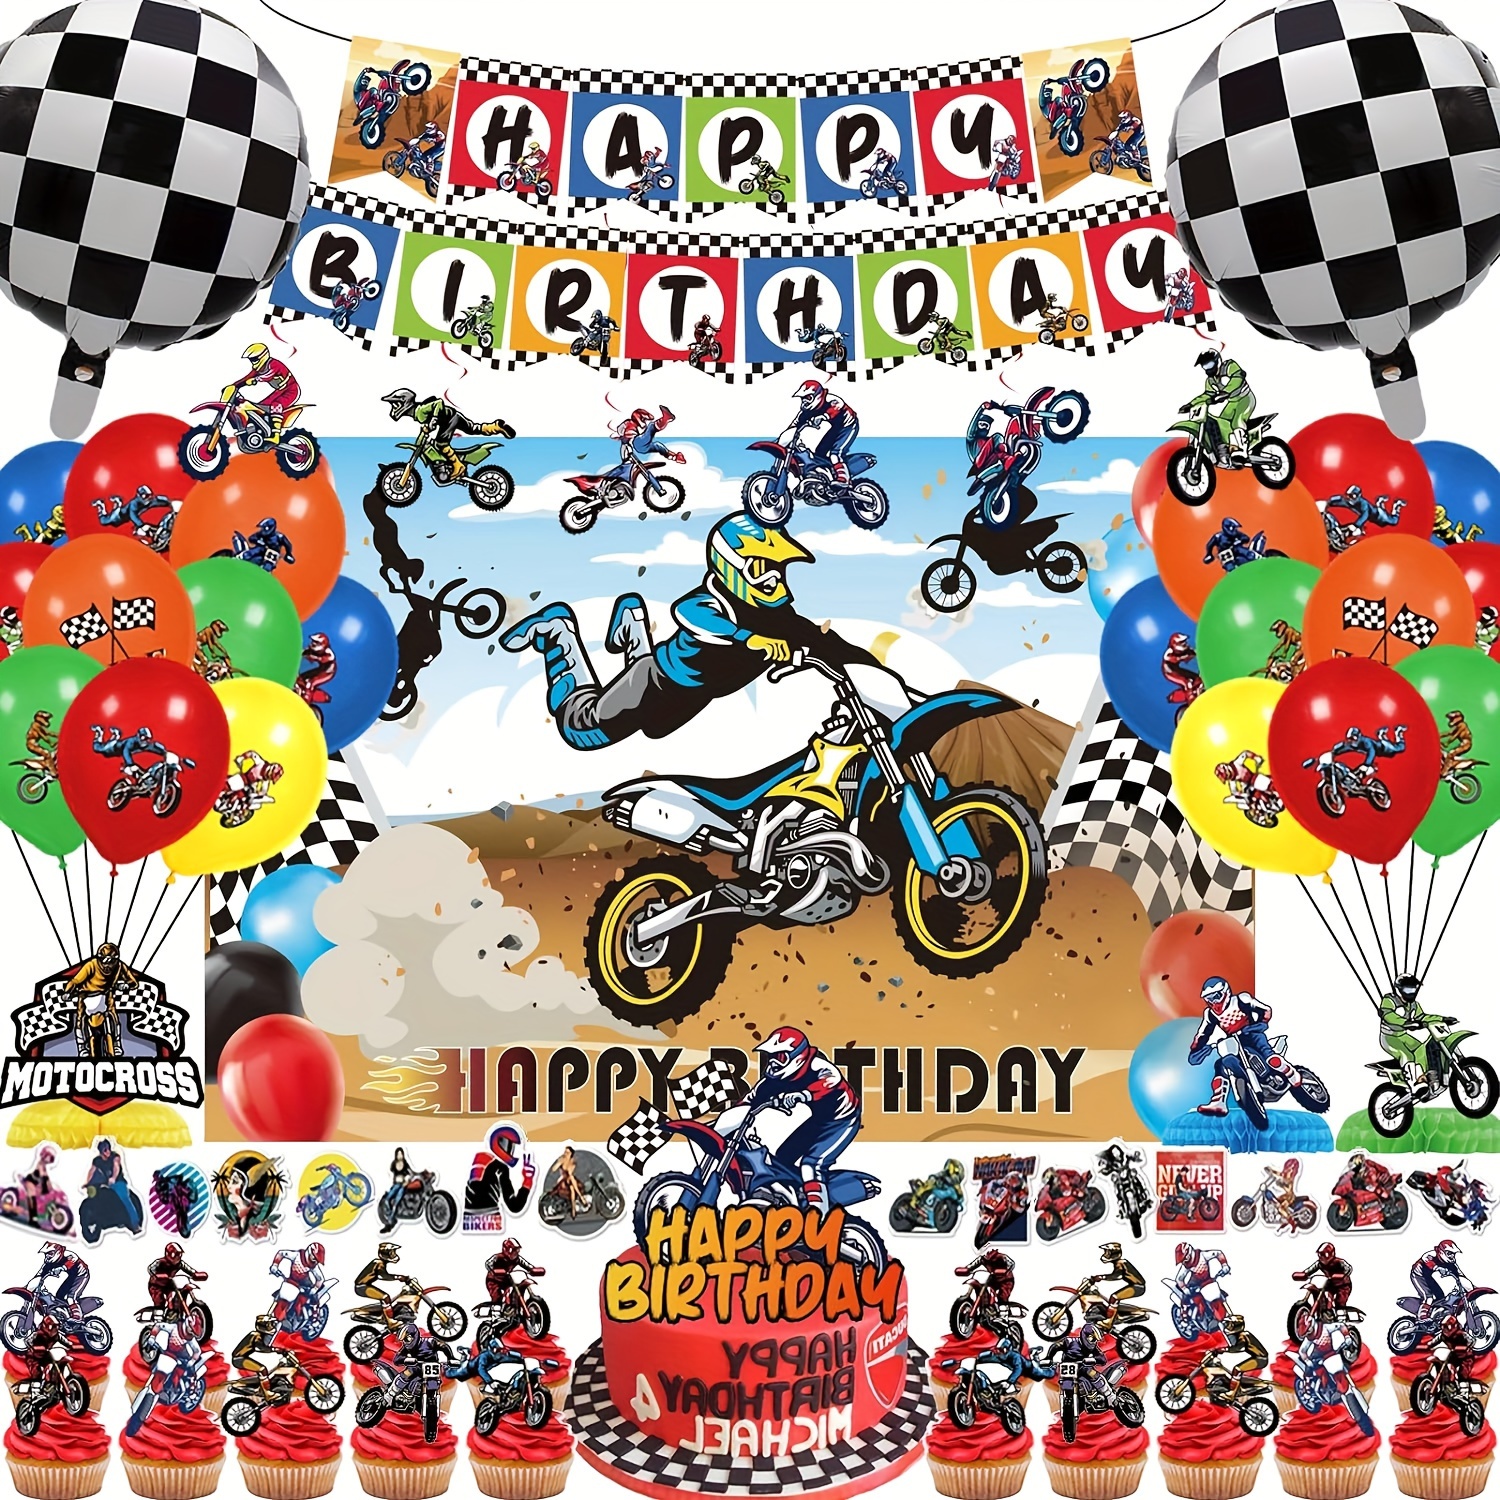 

112pcs Dirt Decorations, Motocross Birthday Party Supplies Includes Banner, Cake Topper, Cupcake Topper, Backdrop, Dirt Supplies, Motorcycle Extreme Sports Party Decorations